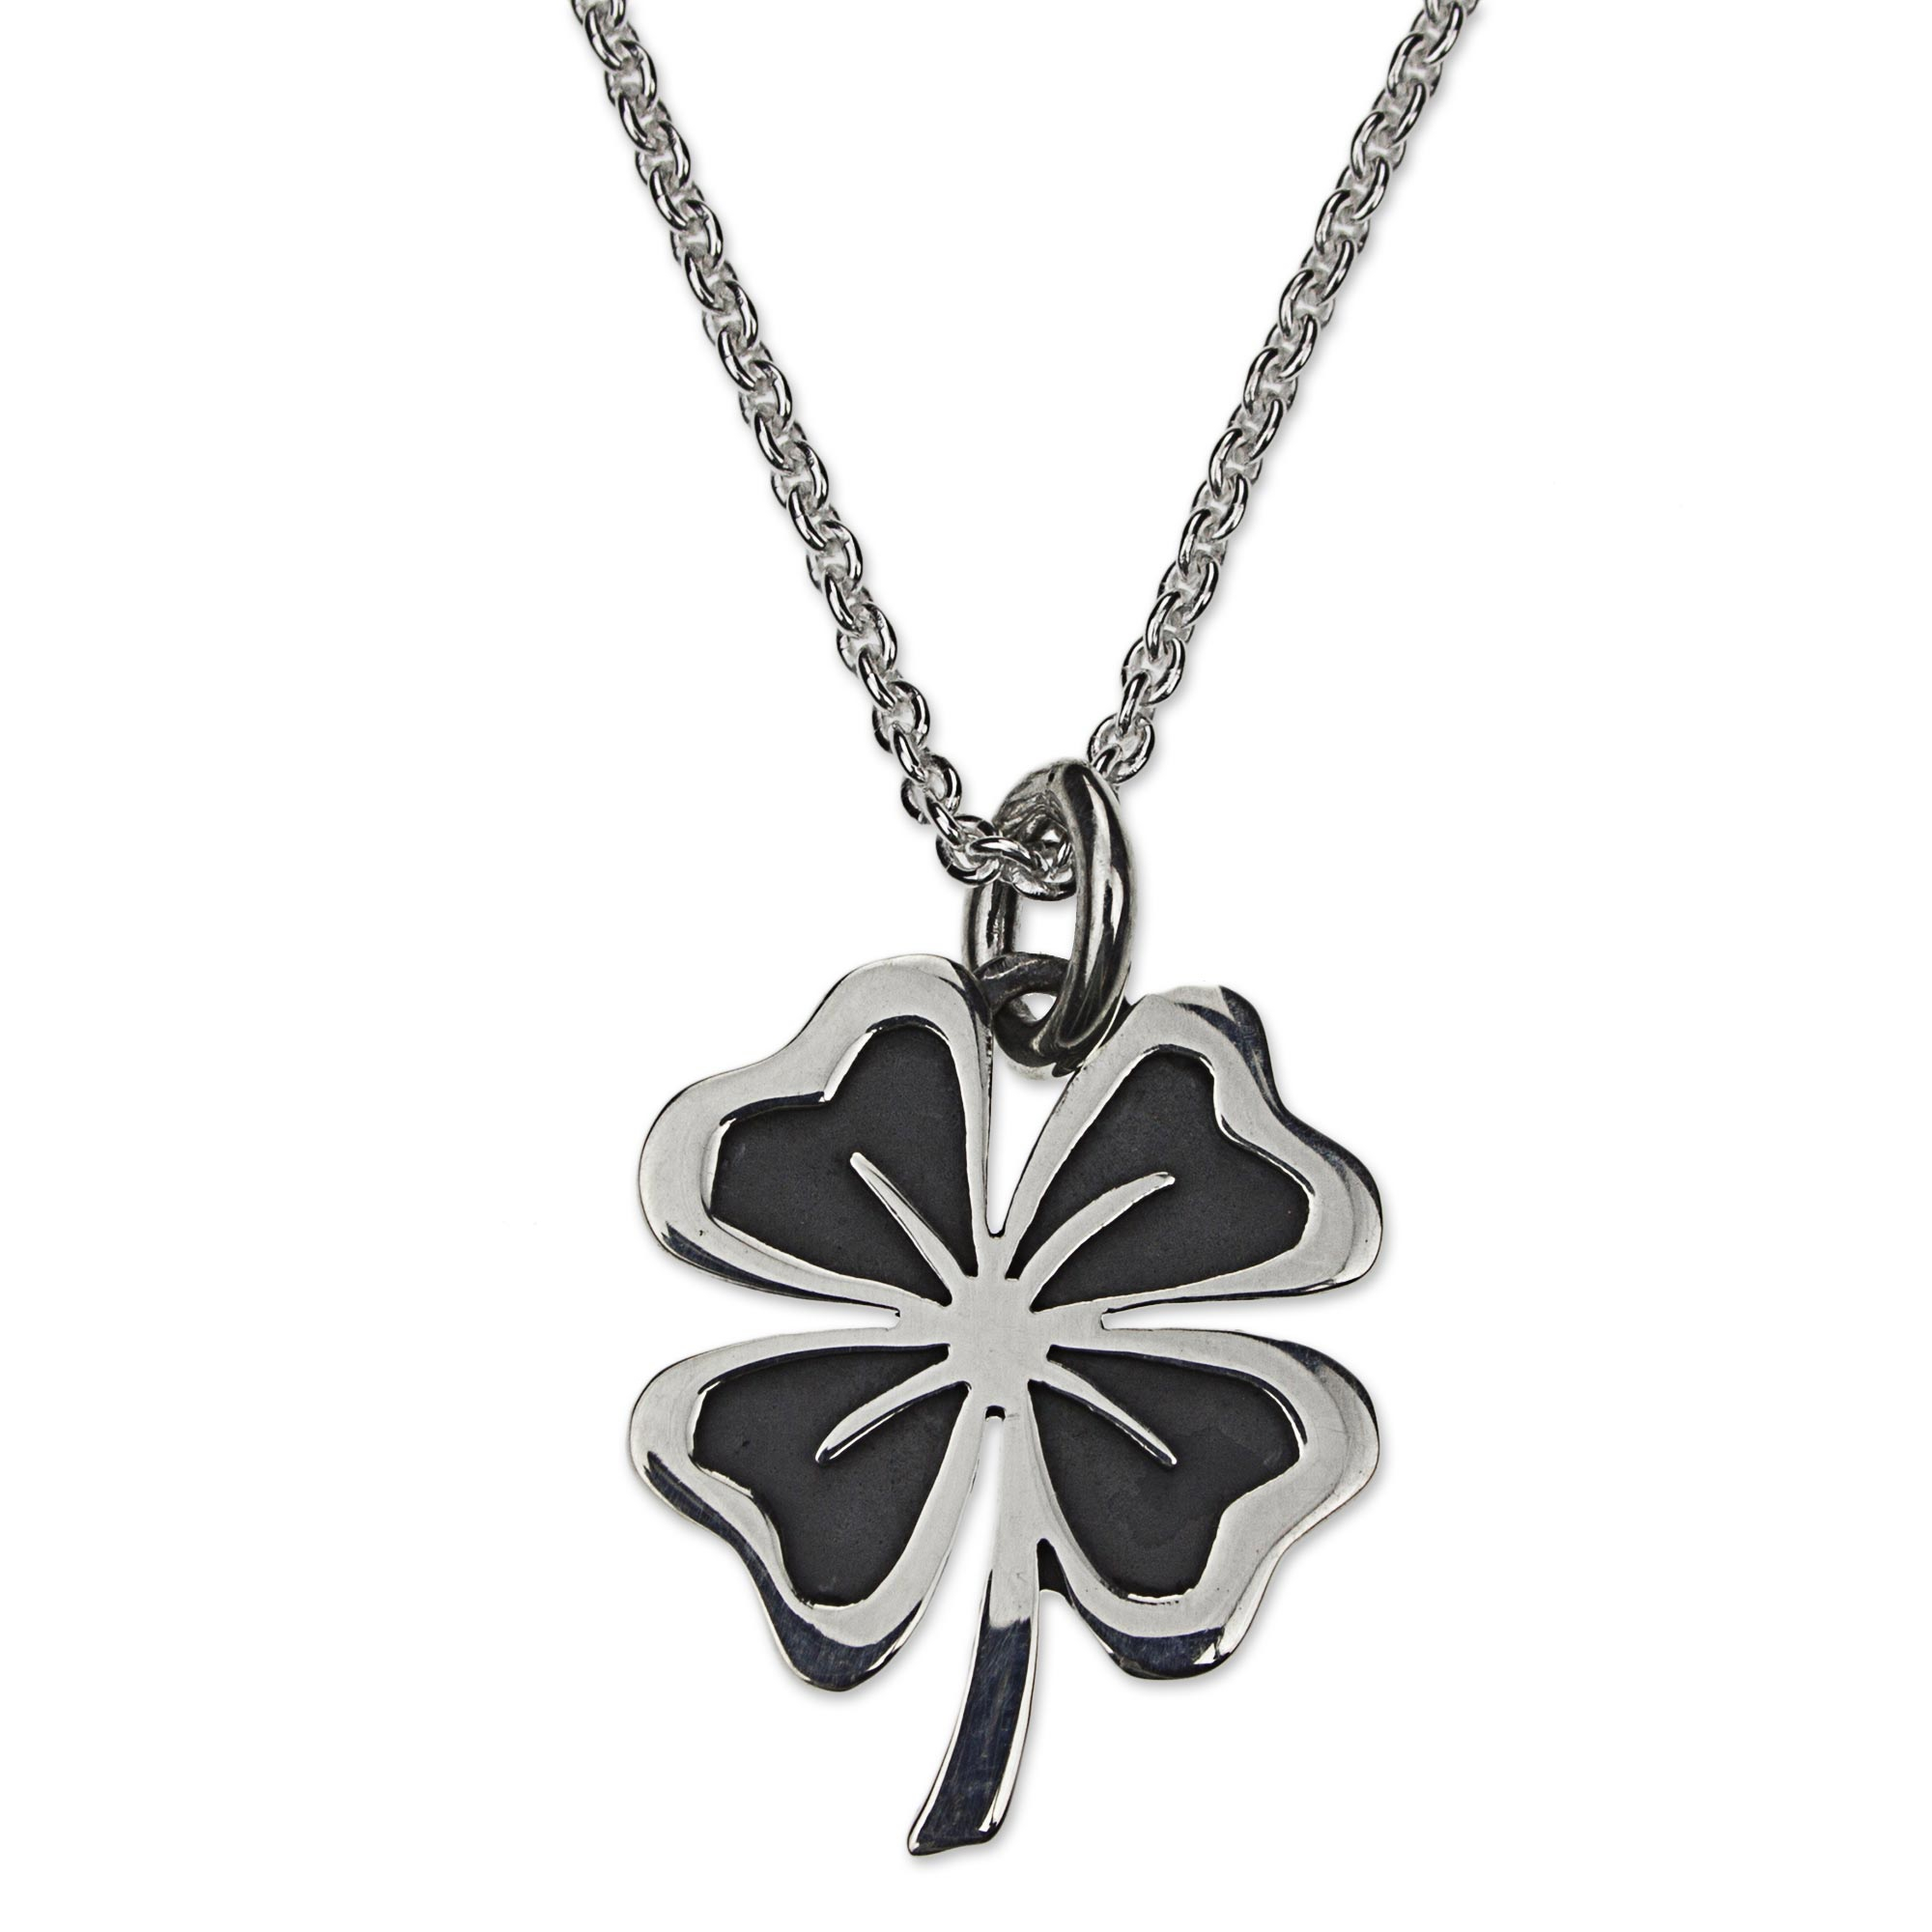 Sterling Silver Clover Pendant Necklace from Mexico - Suave Clover | NOVICA